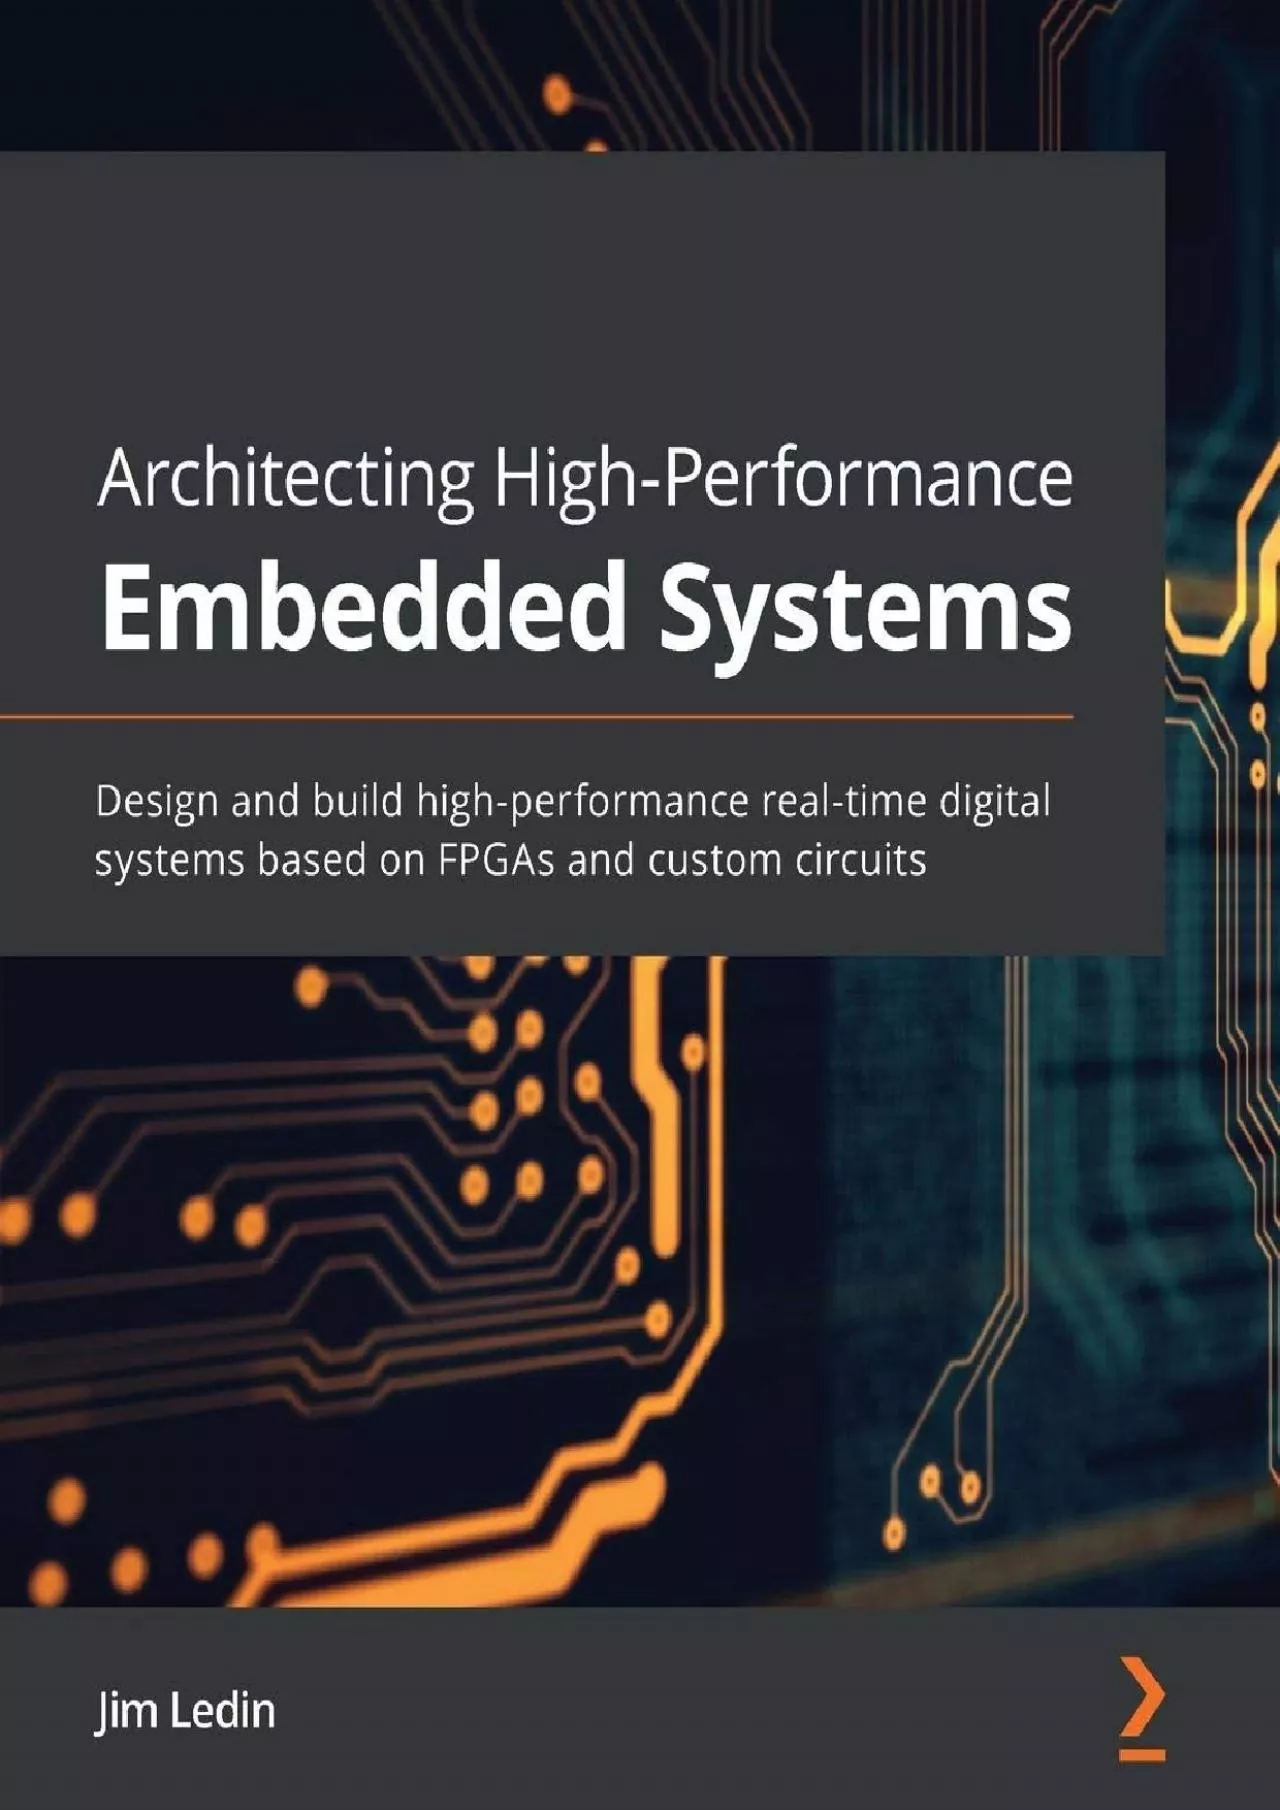 [READING BOOK]-Architecting High-Performance Embedded Systems: Design and build high-performance